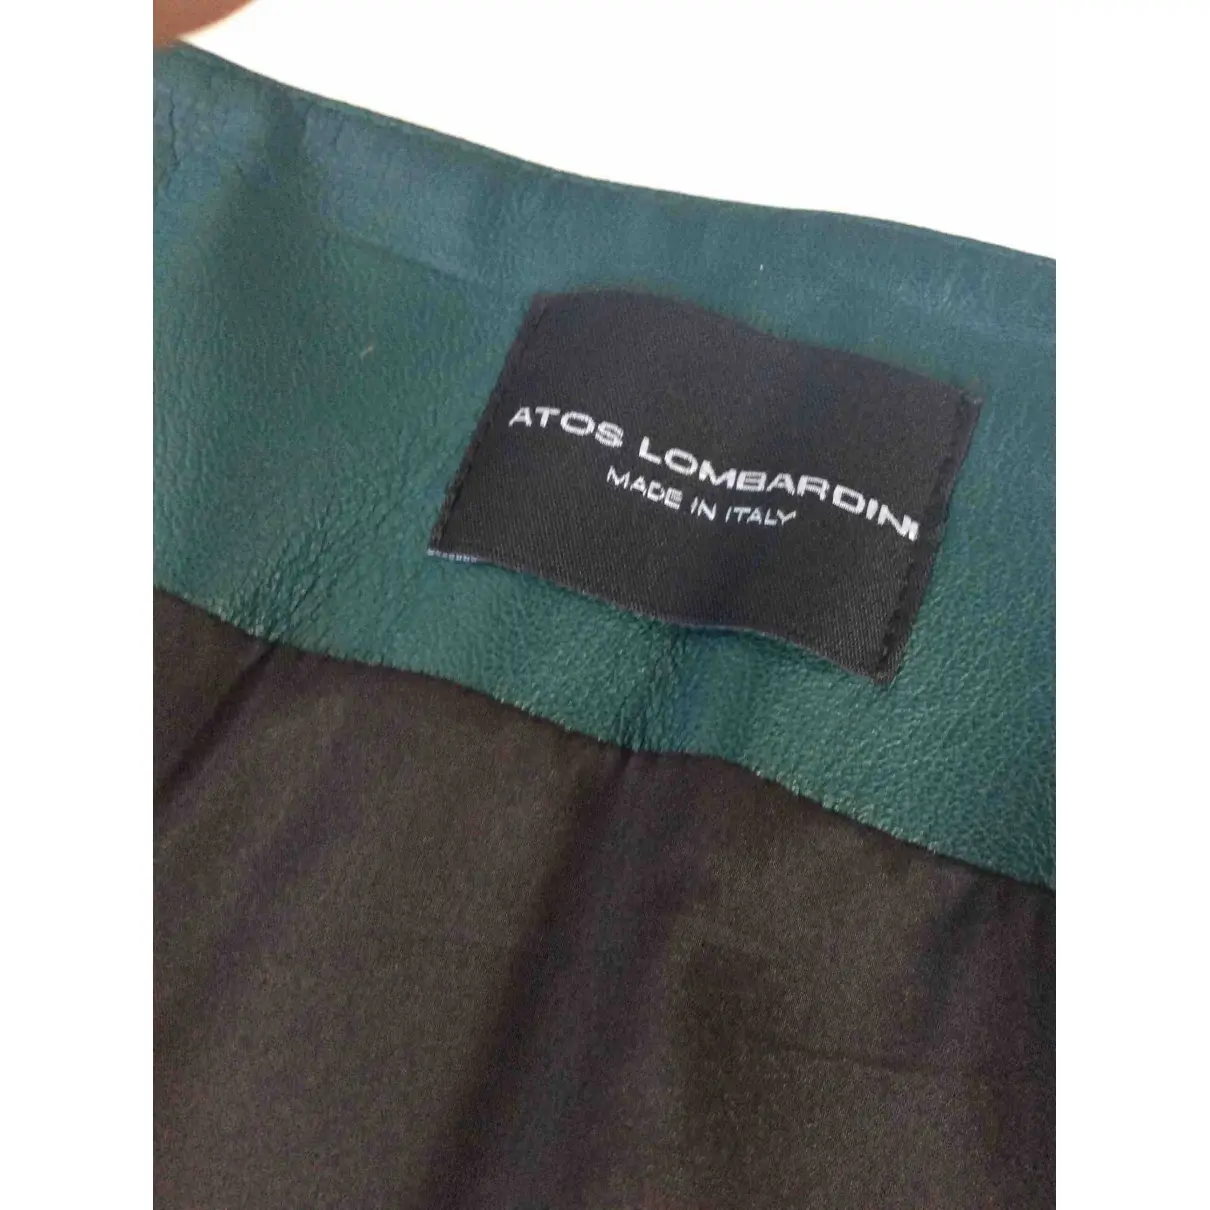 Buy ATOS LOMBARDINI Leather mid-length skirt online